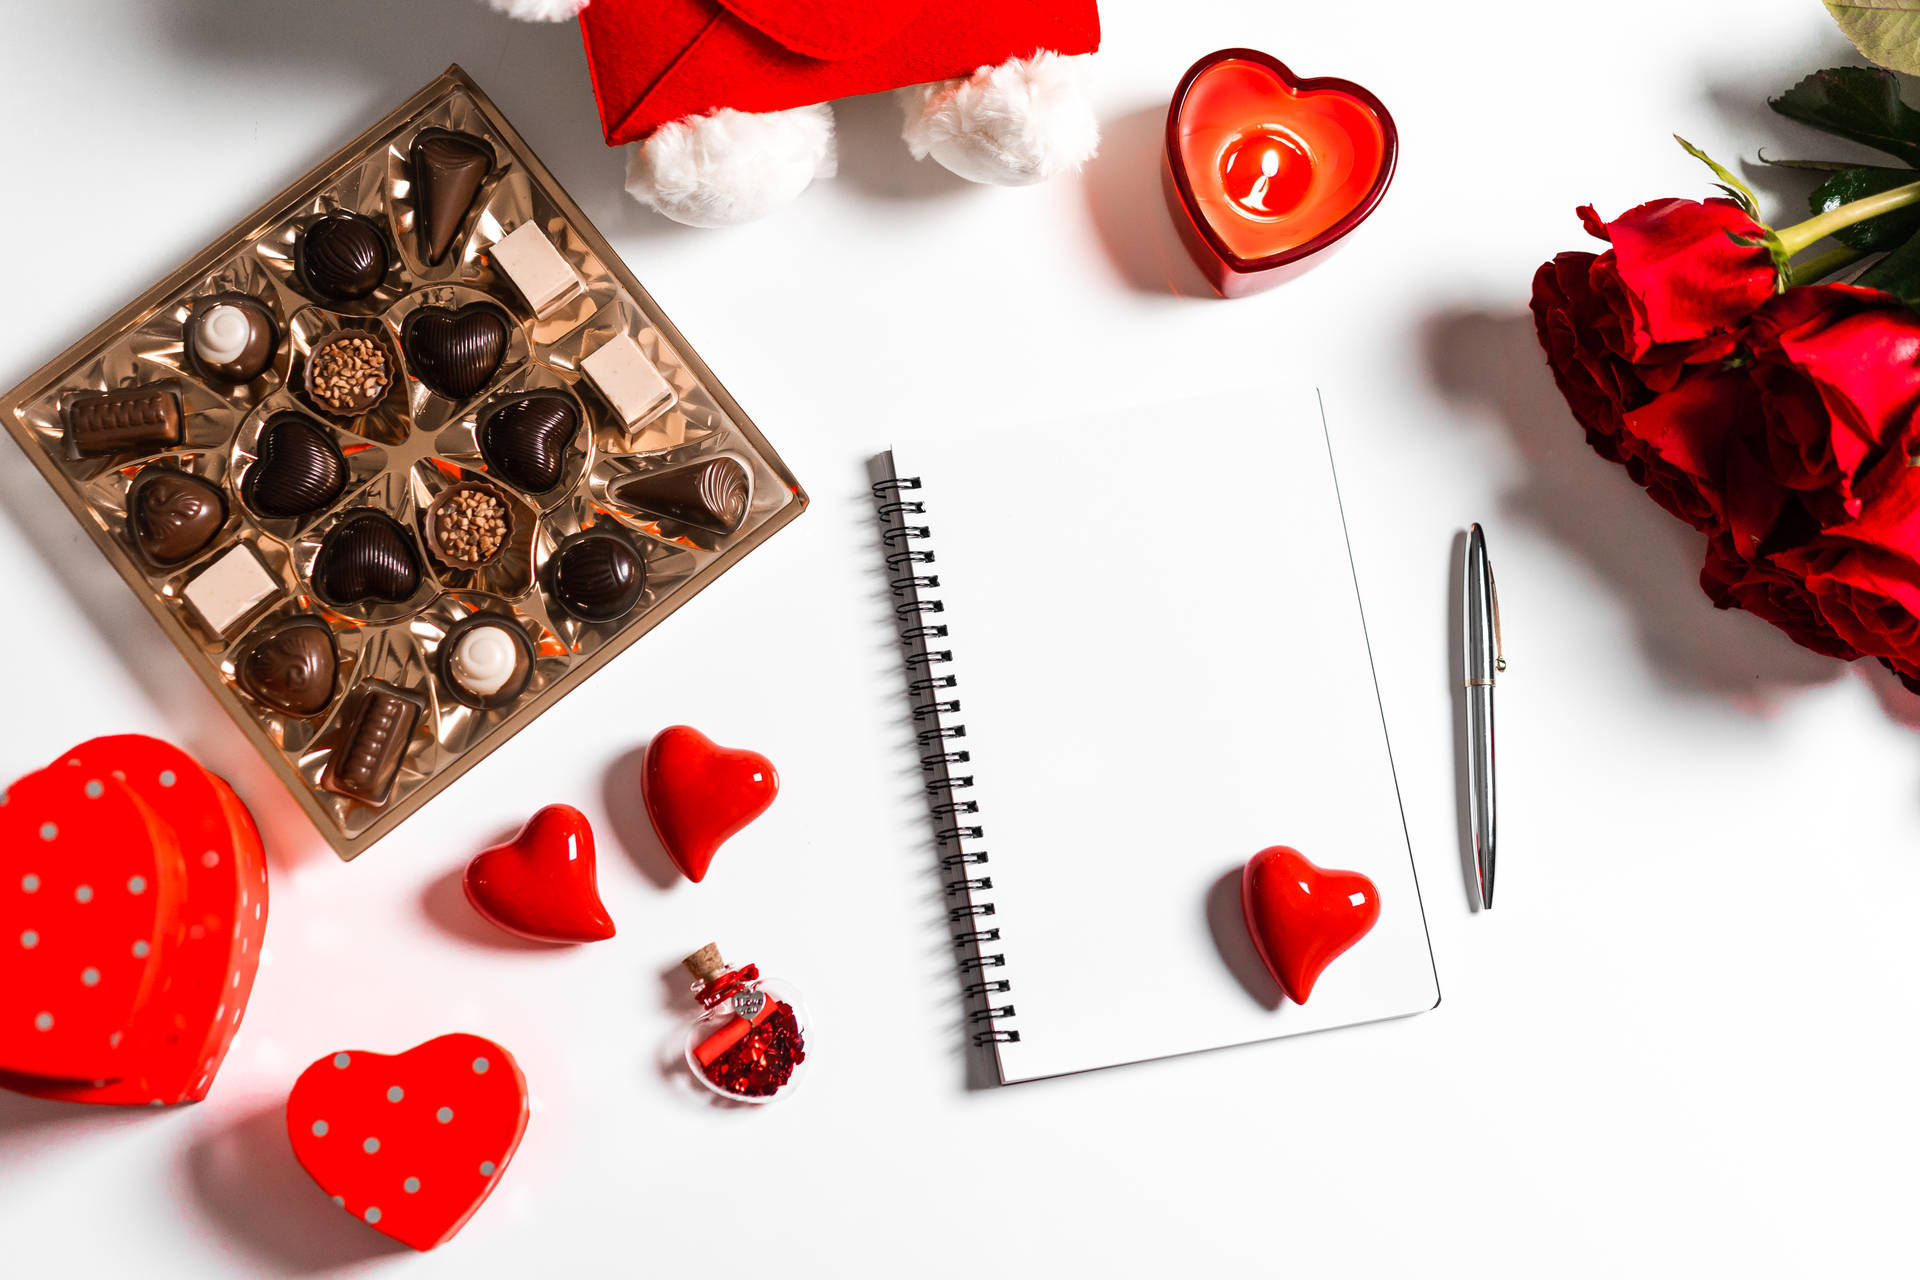 The Symbol Of Love: Romantic Flowers With Chocolates And A Notebook Background